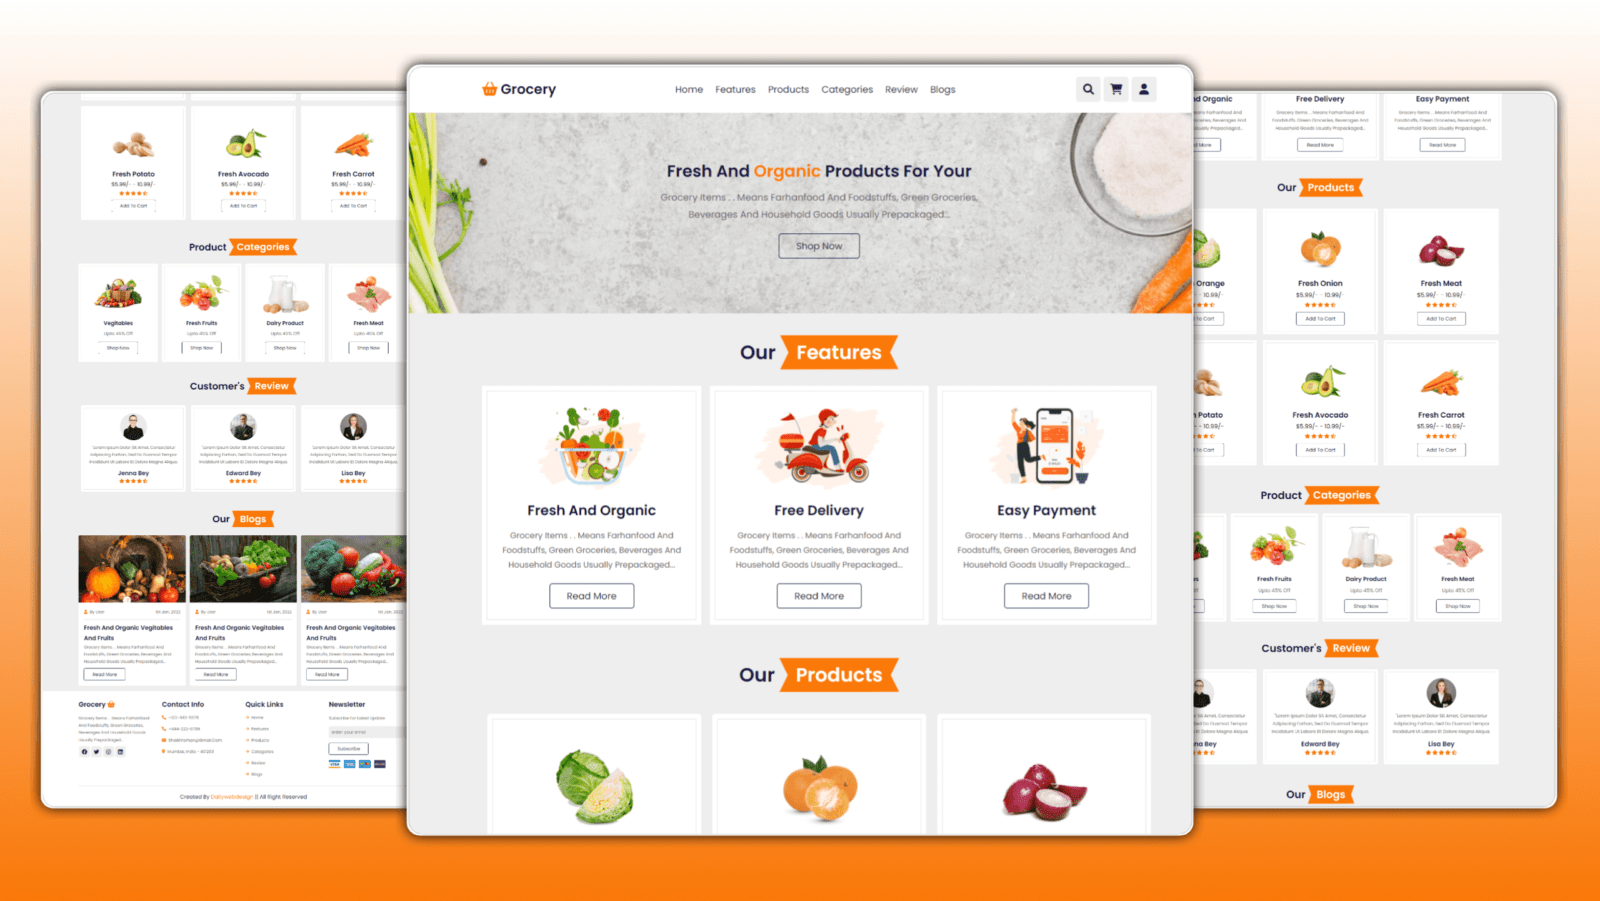 Grocery shopping website Design Using HTML CSS And JAVASCRIPT With Source Code